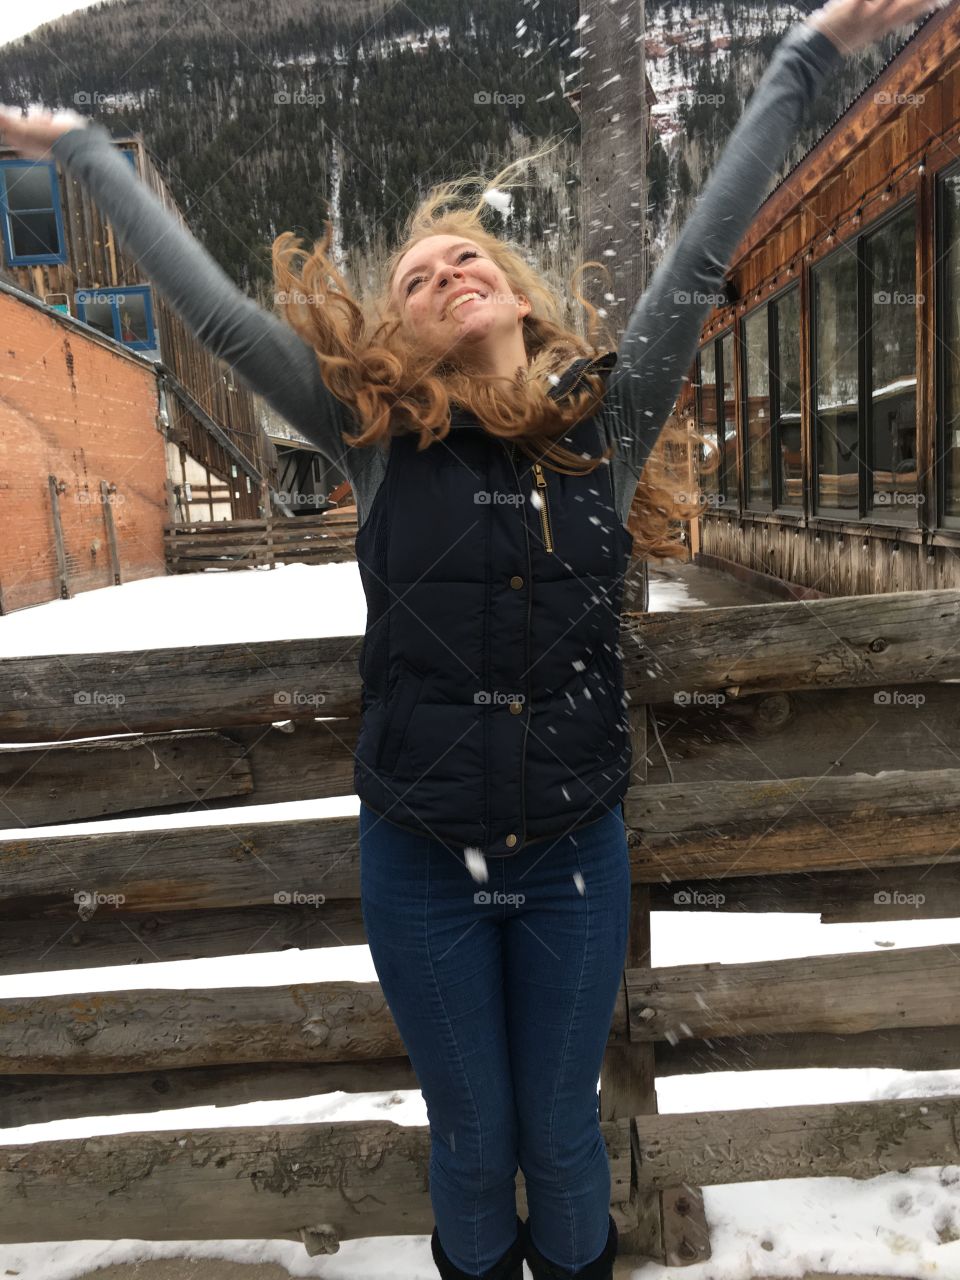 A young woman happily tosses snow in the air, as an appreciation of the beauty of overlooked commonalities. The dark wood behind her creates a dark contrast to the stark white snow. 